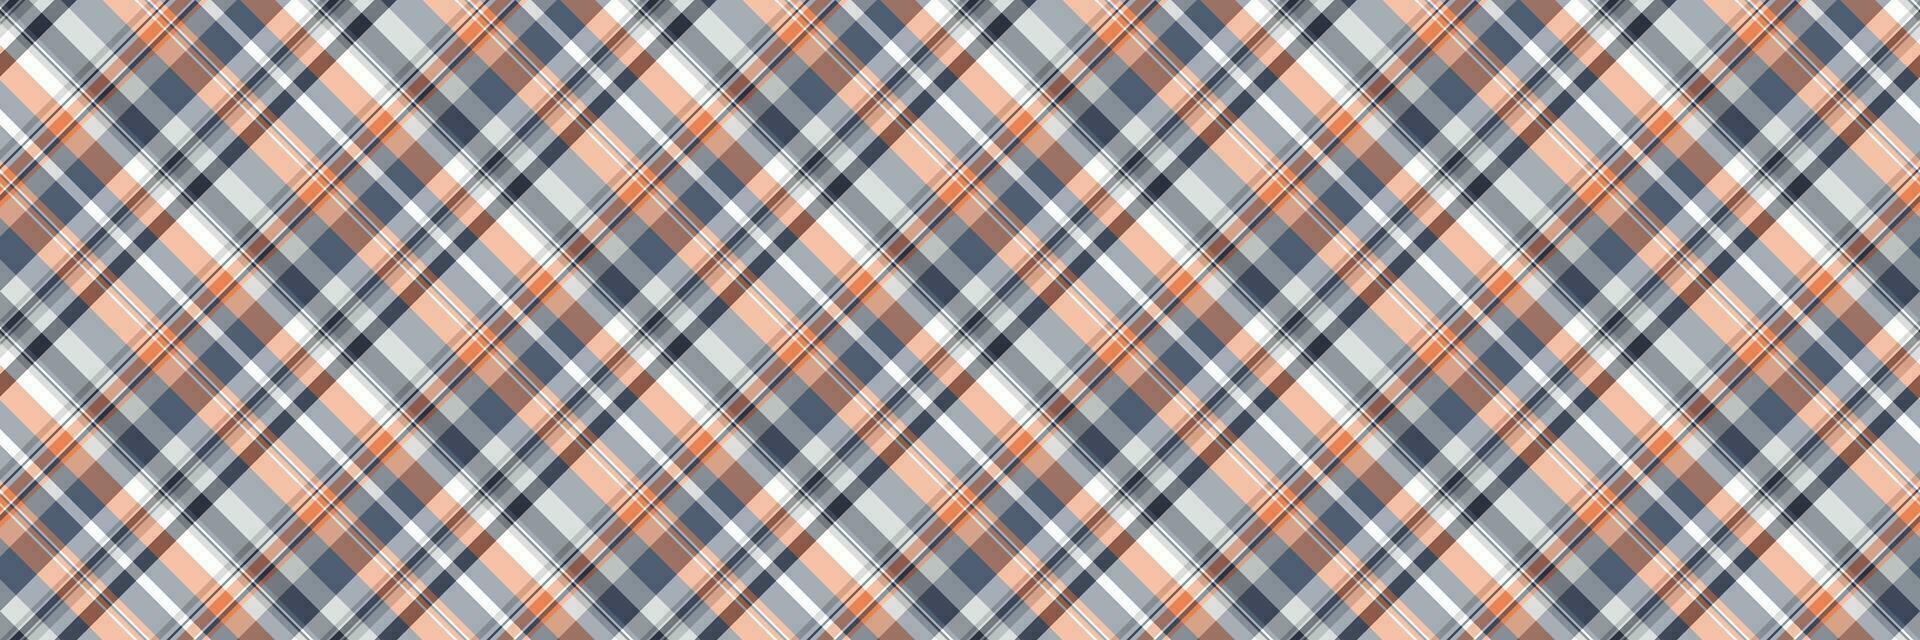 Blanket textile fabric background, endless seamless texture vector. Net tartan plaid check pattern in pastel and orange colors. vector